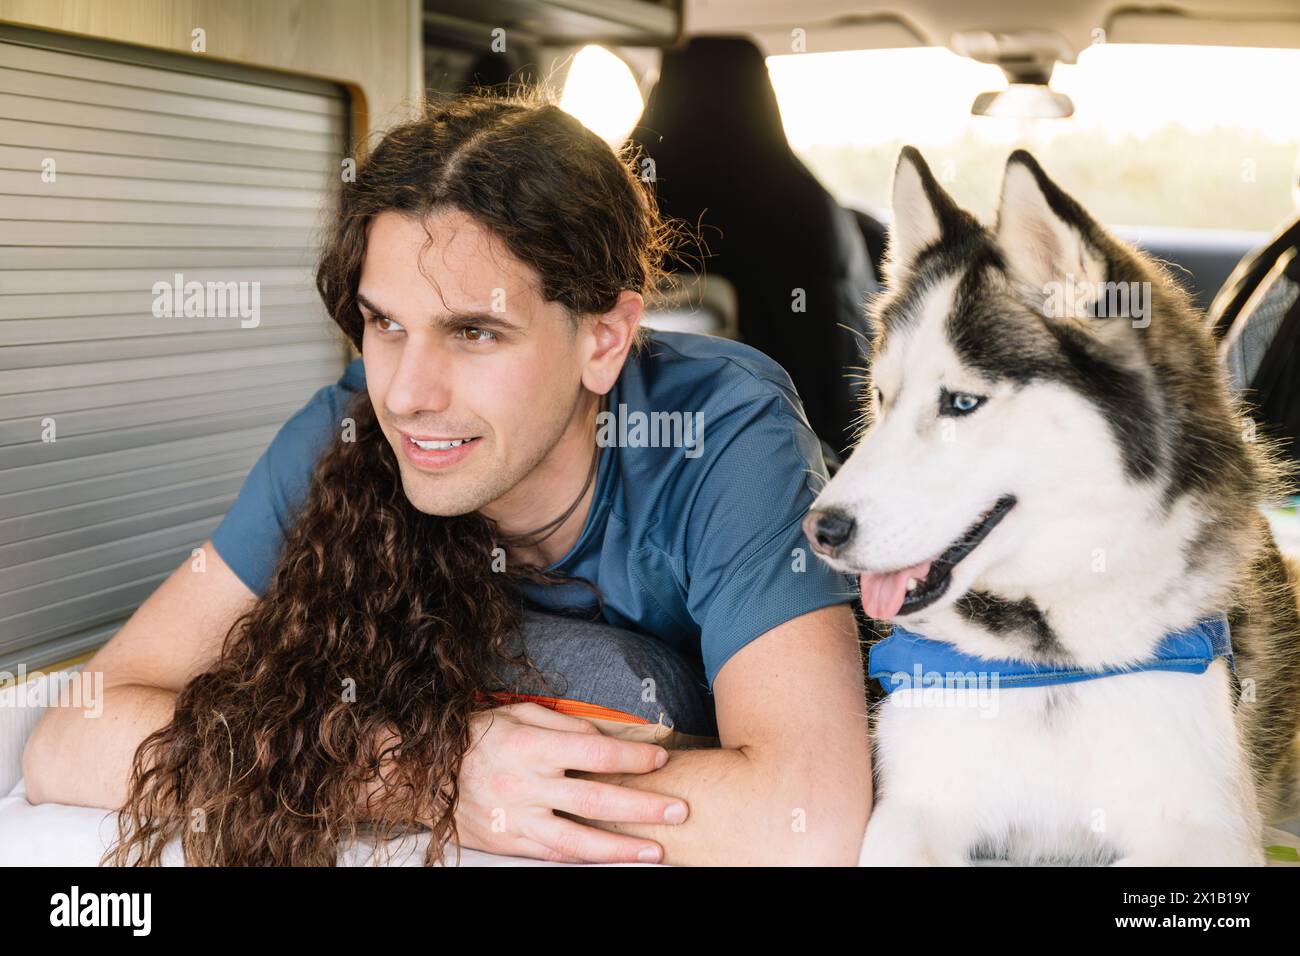 Horizontal photo a man with luscious curly hair shares a relaxed moment with his joyful husky inside the comfortable space of their modern c Stock Photo